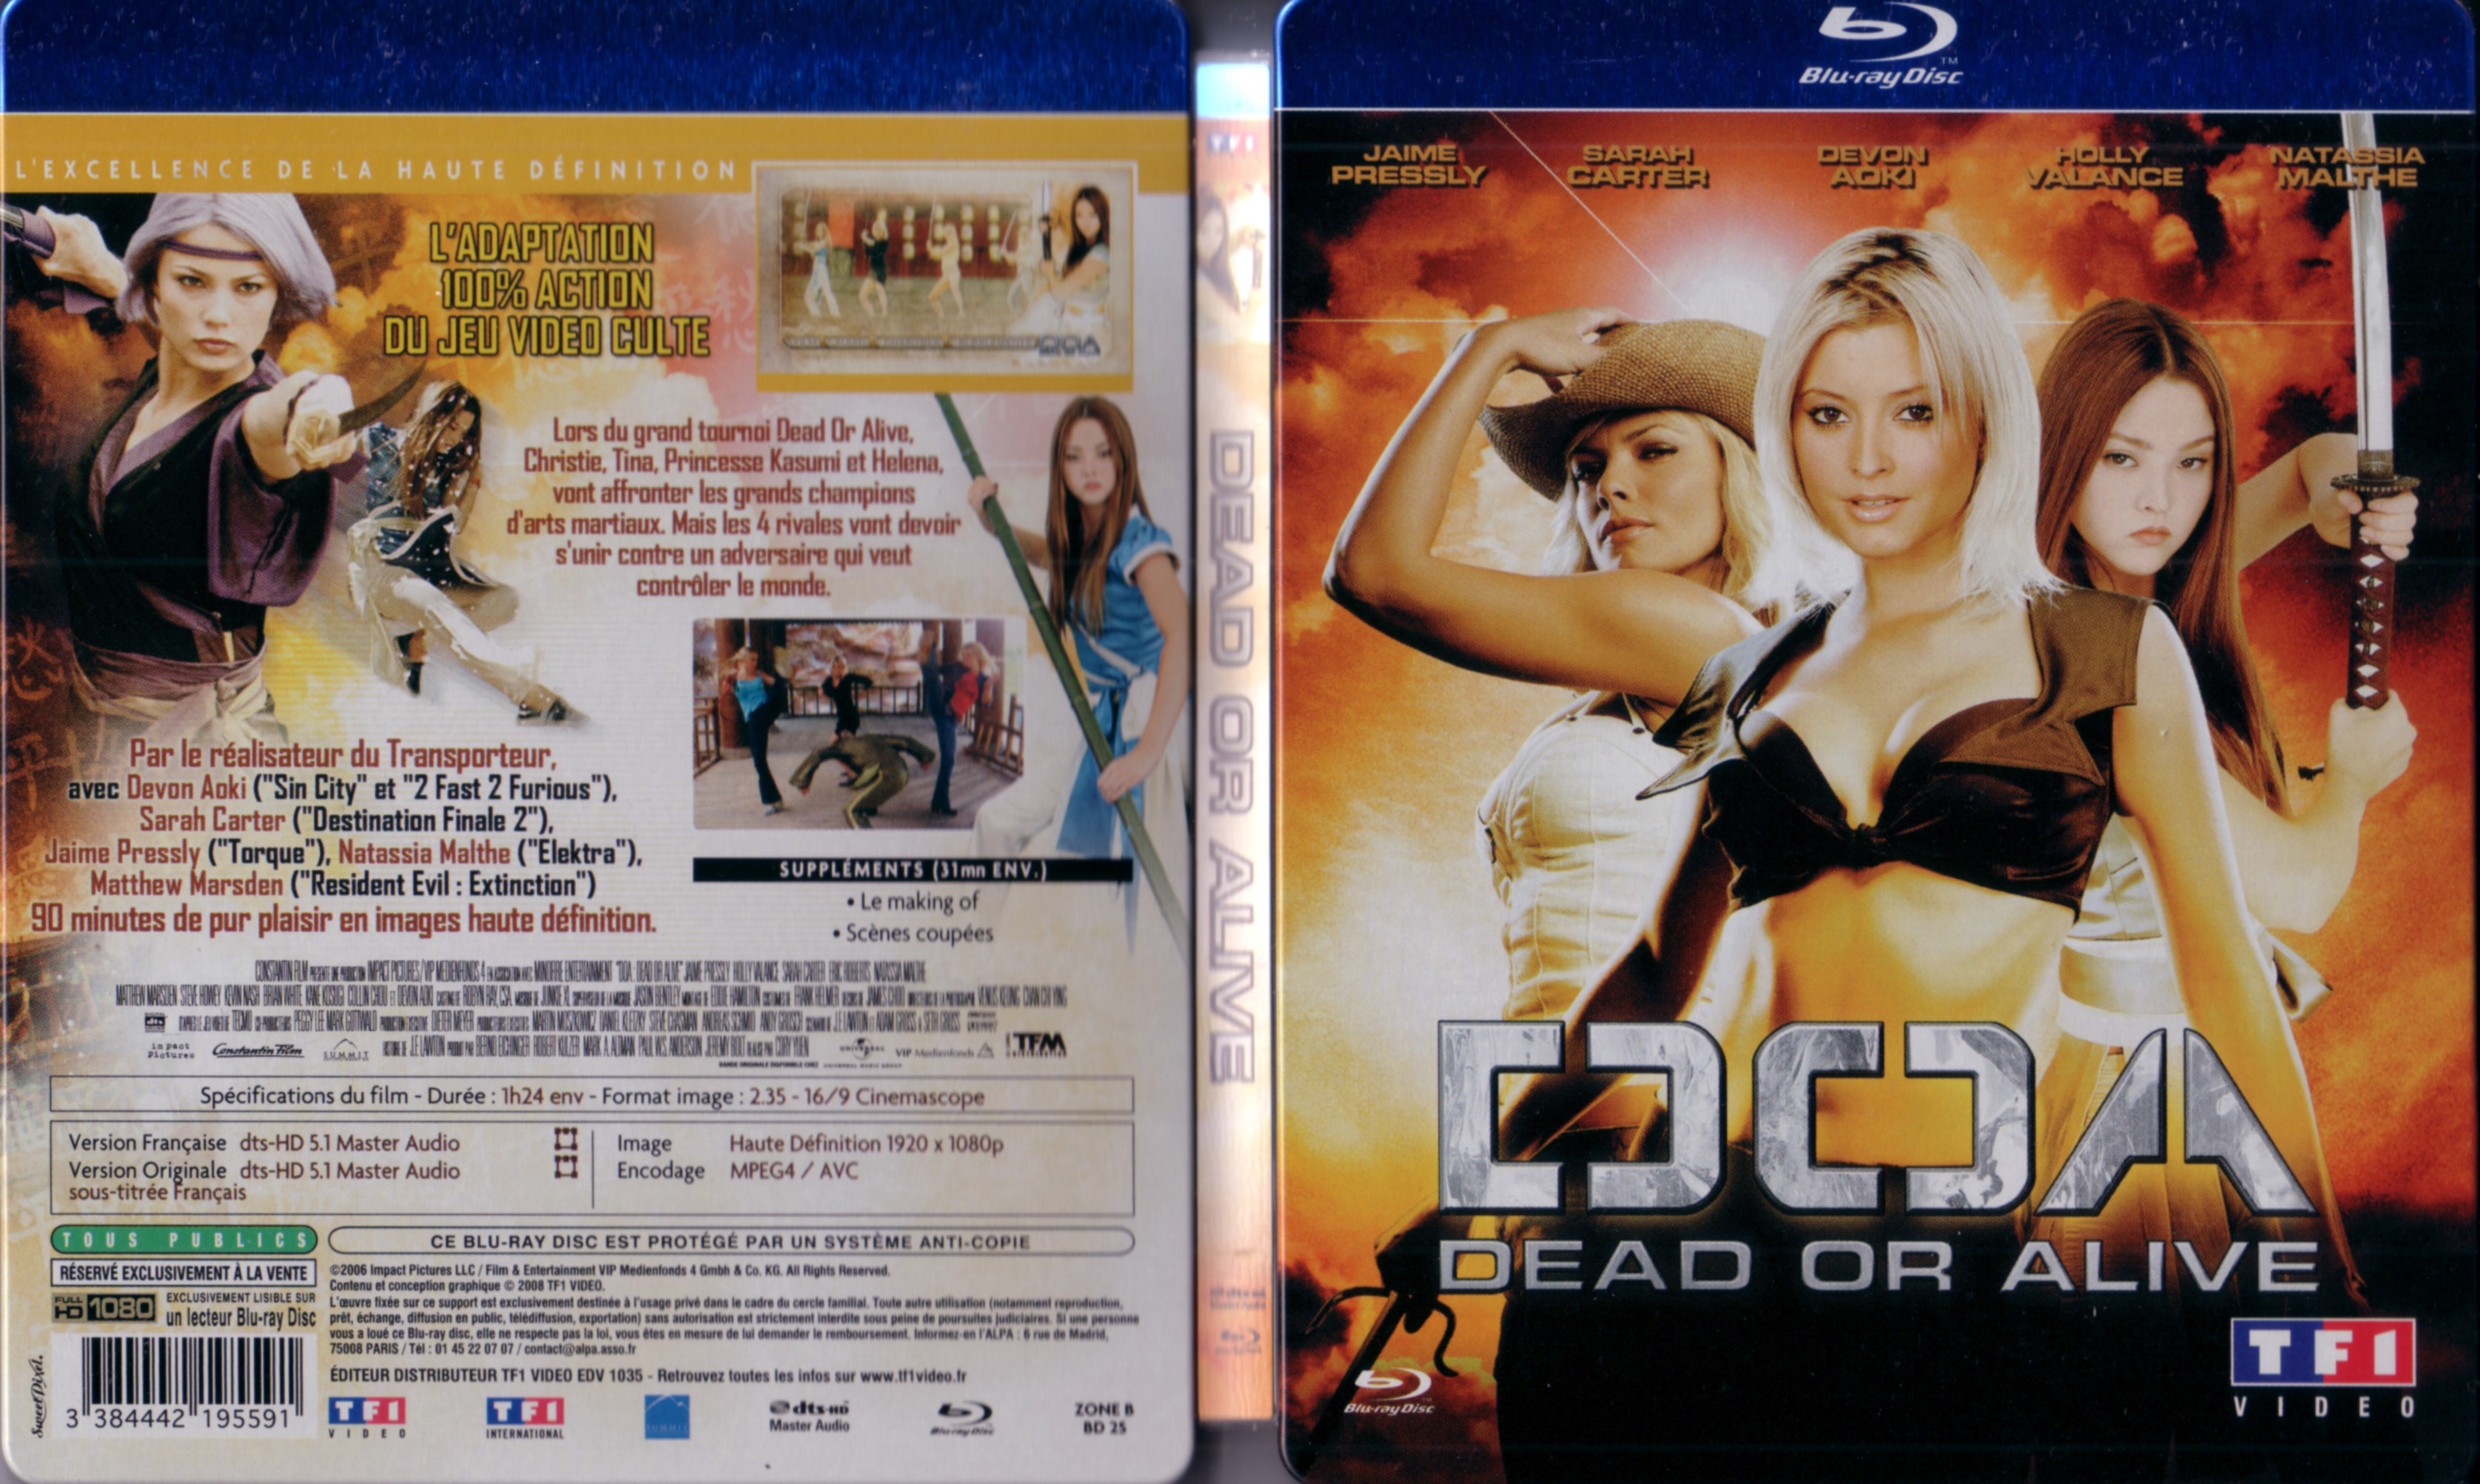 Jaquette DVD Dead or alive (BLU-RAY)